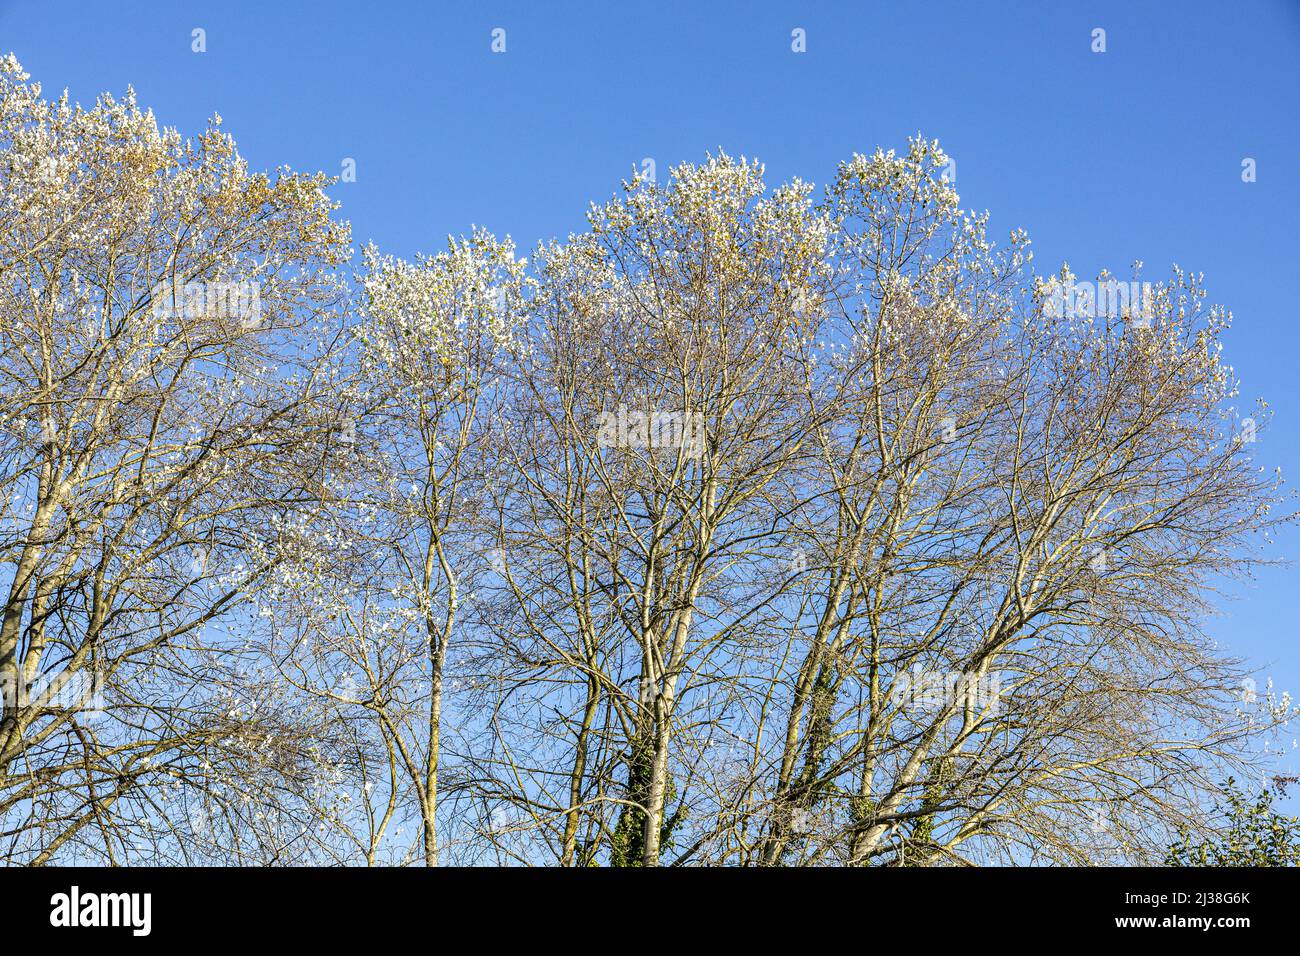 Poplar trees in autumn set against a blue sky at huntley in the Forest of Dean, Gloucestershire, England UK Stock Photo